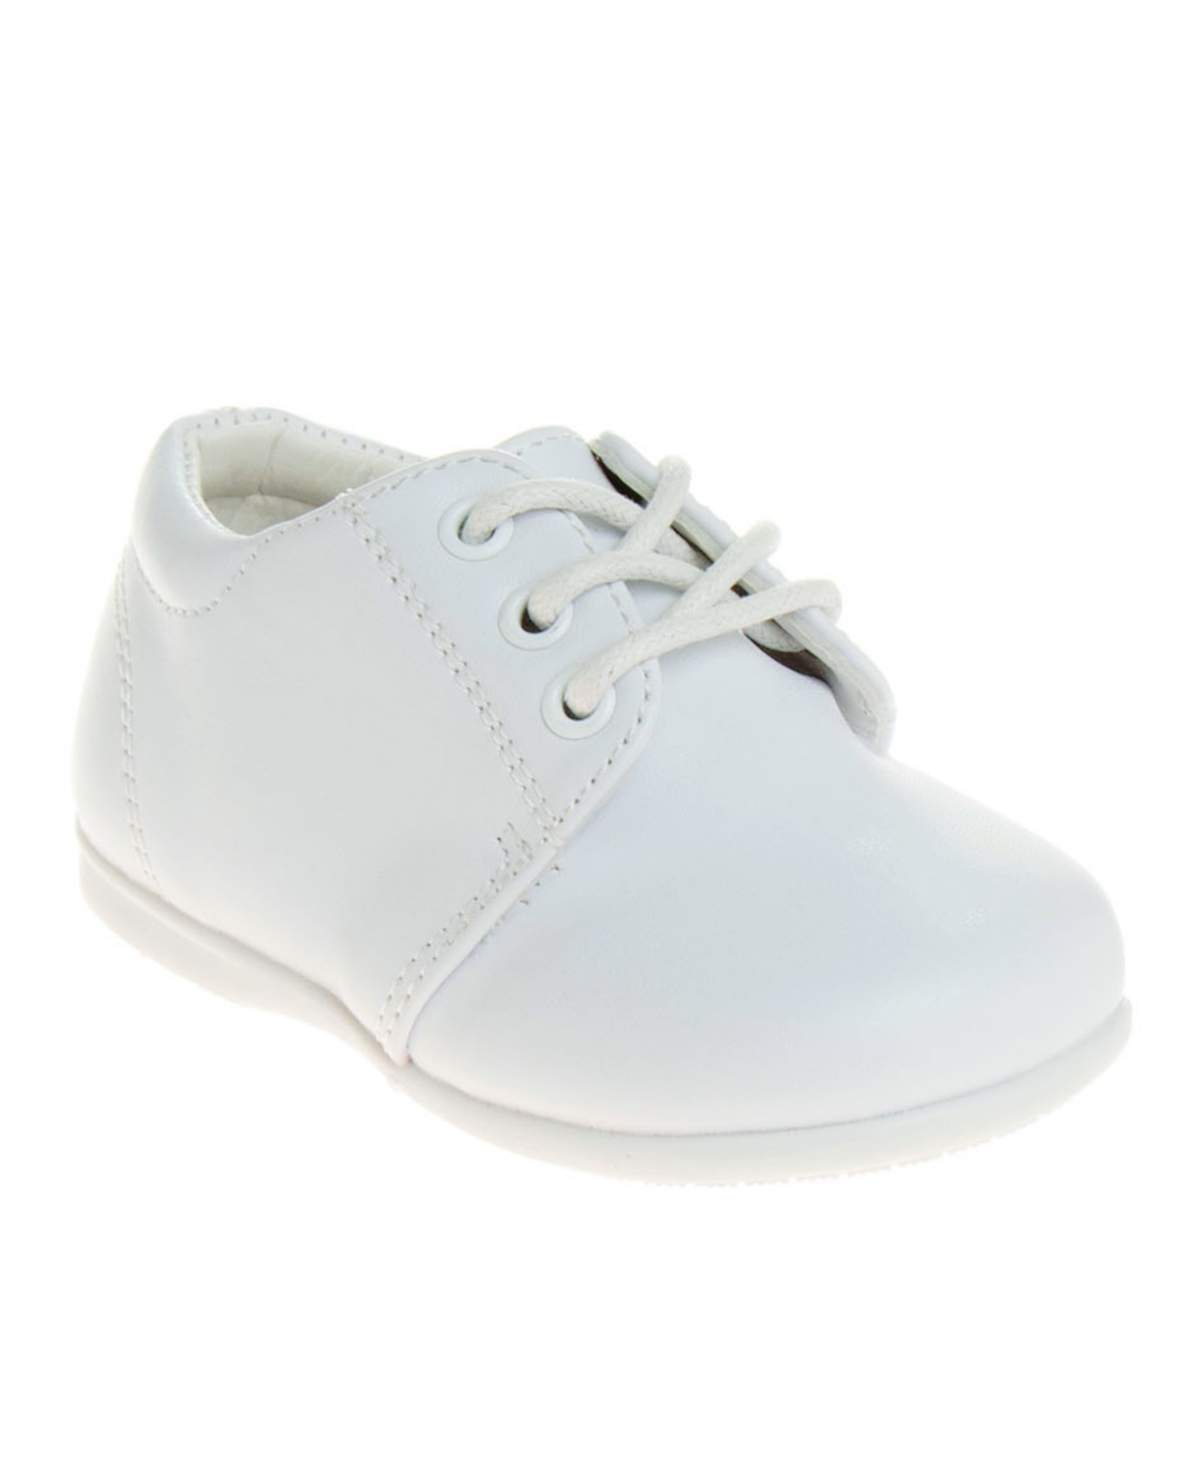 Josmo Kids' Big Boys Lace Up Dress Shoes In White